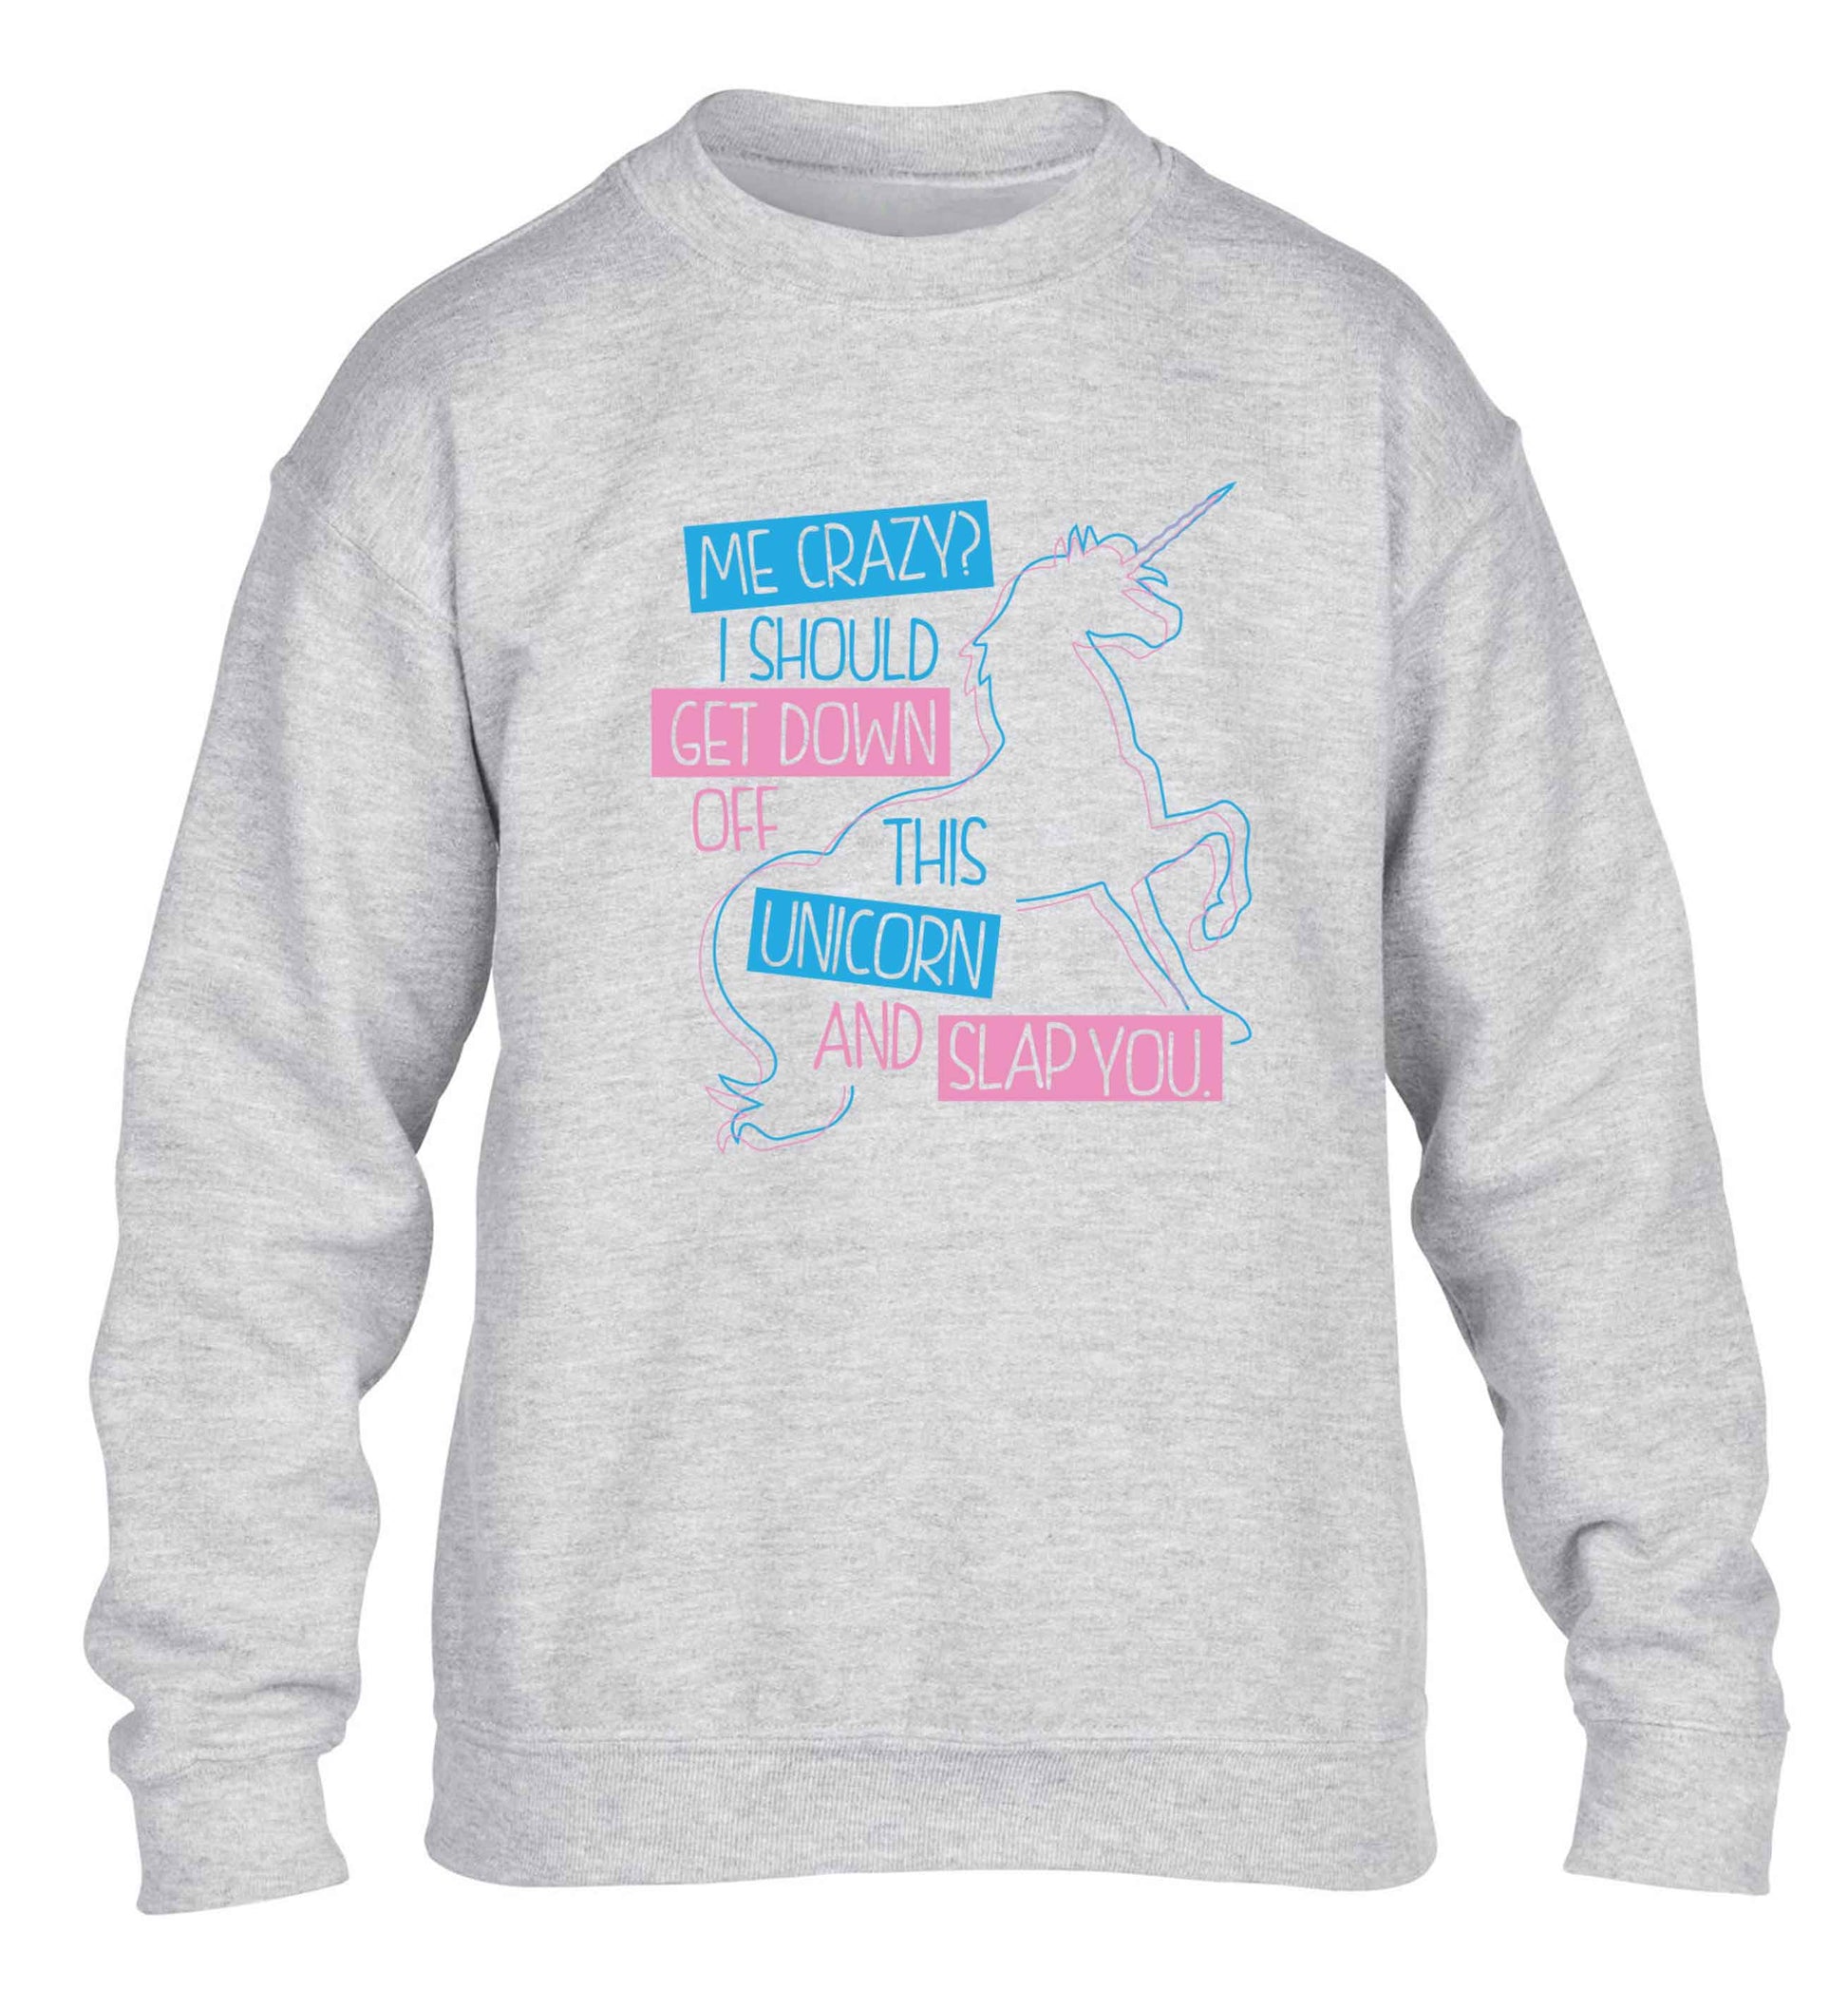 Me crazy? I should get down off this unicorn and slap you children's grey sweater 12-13 Years